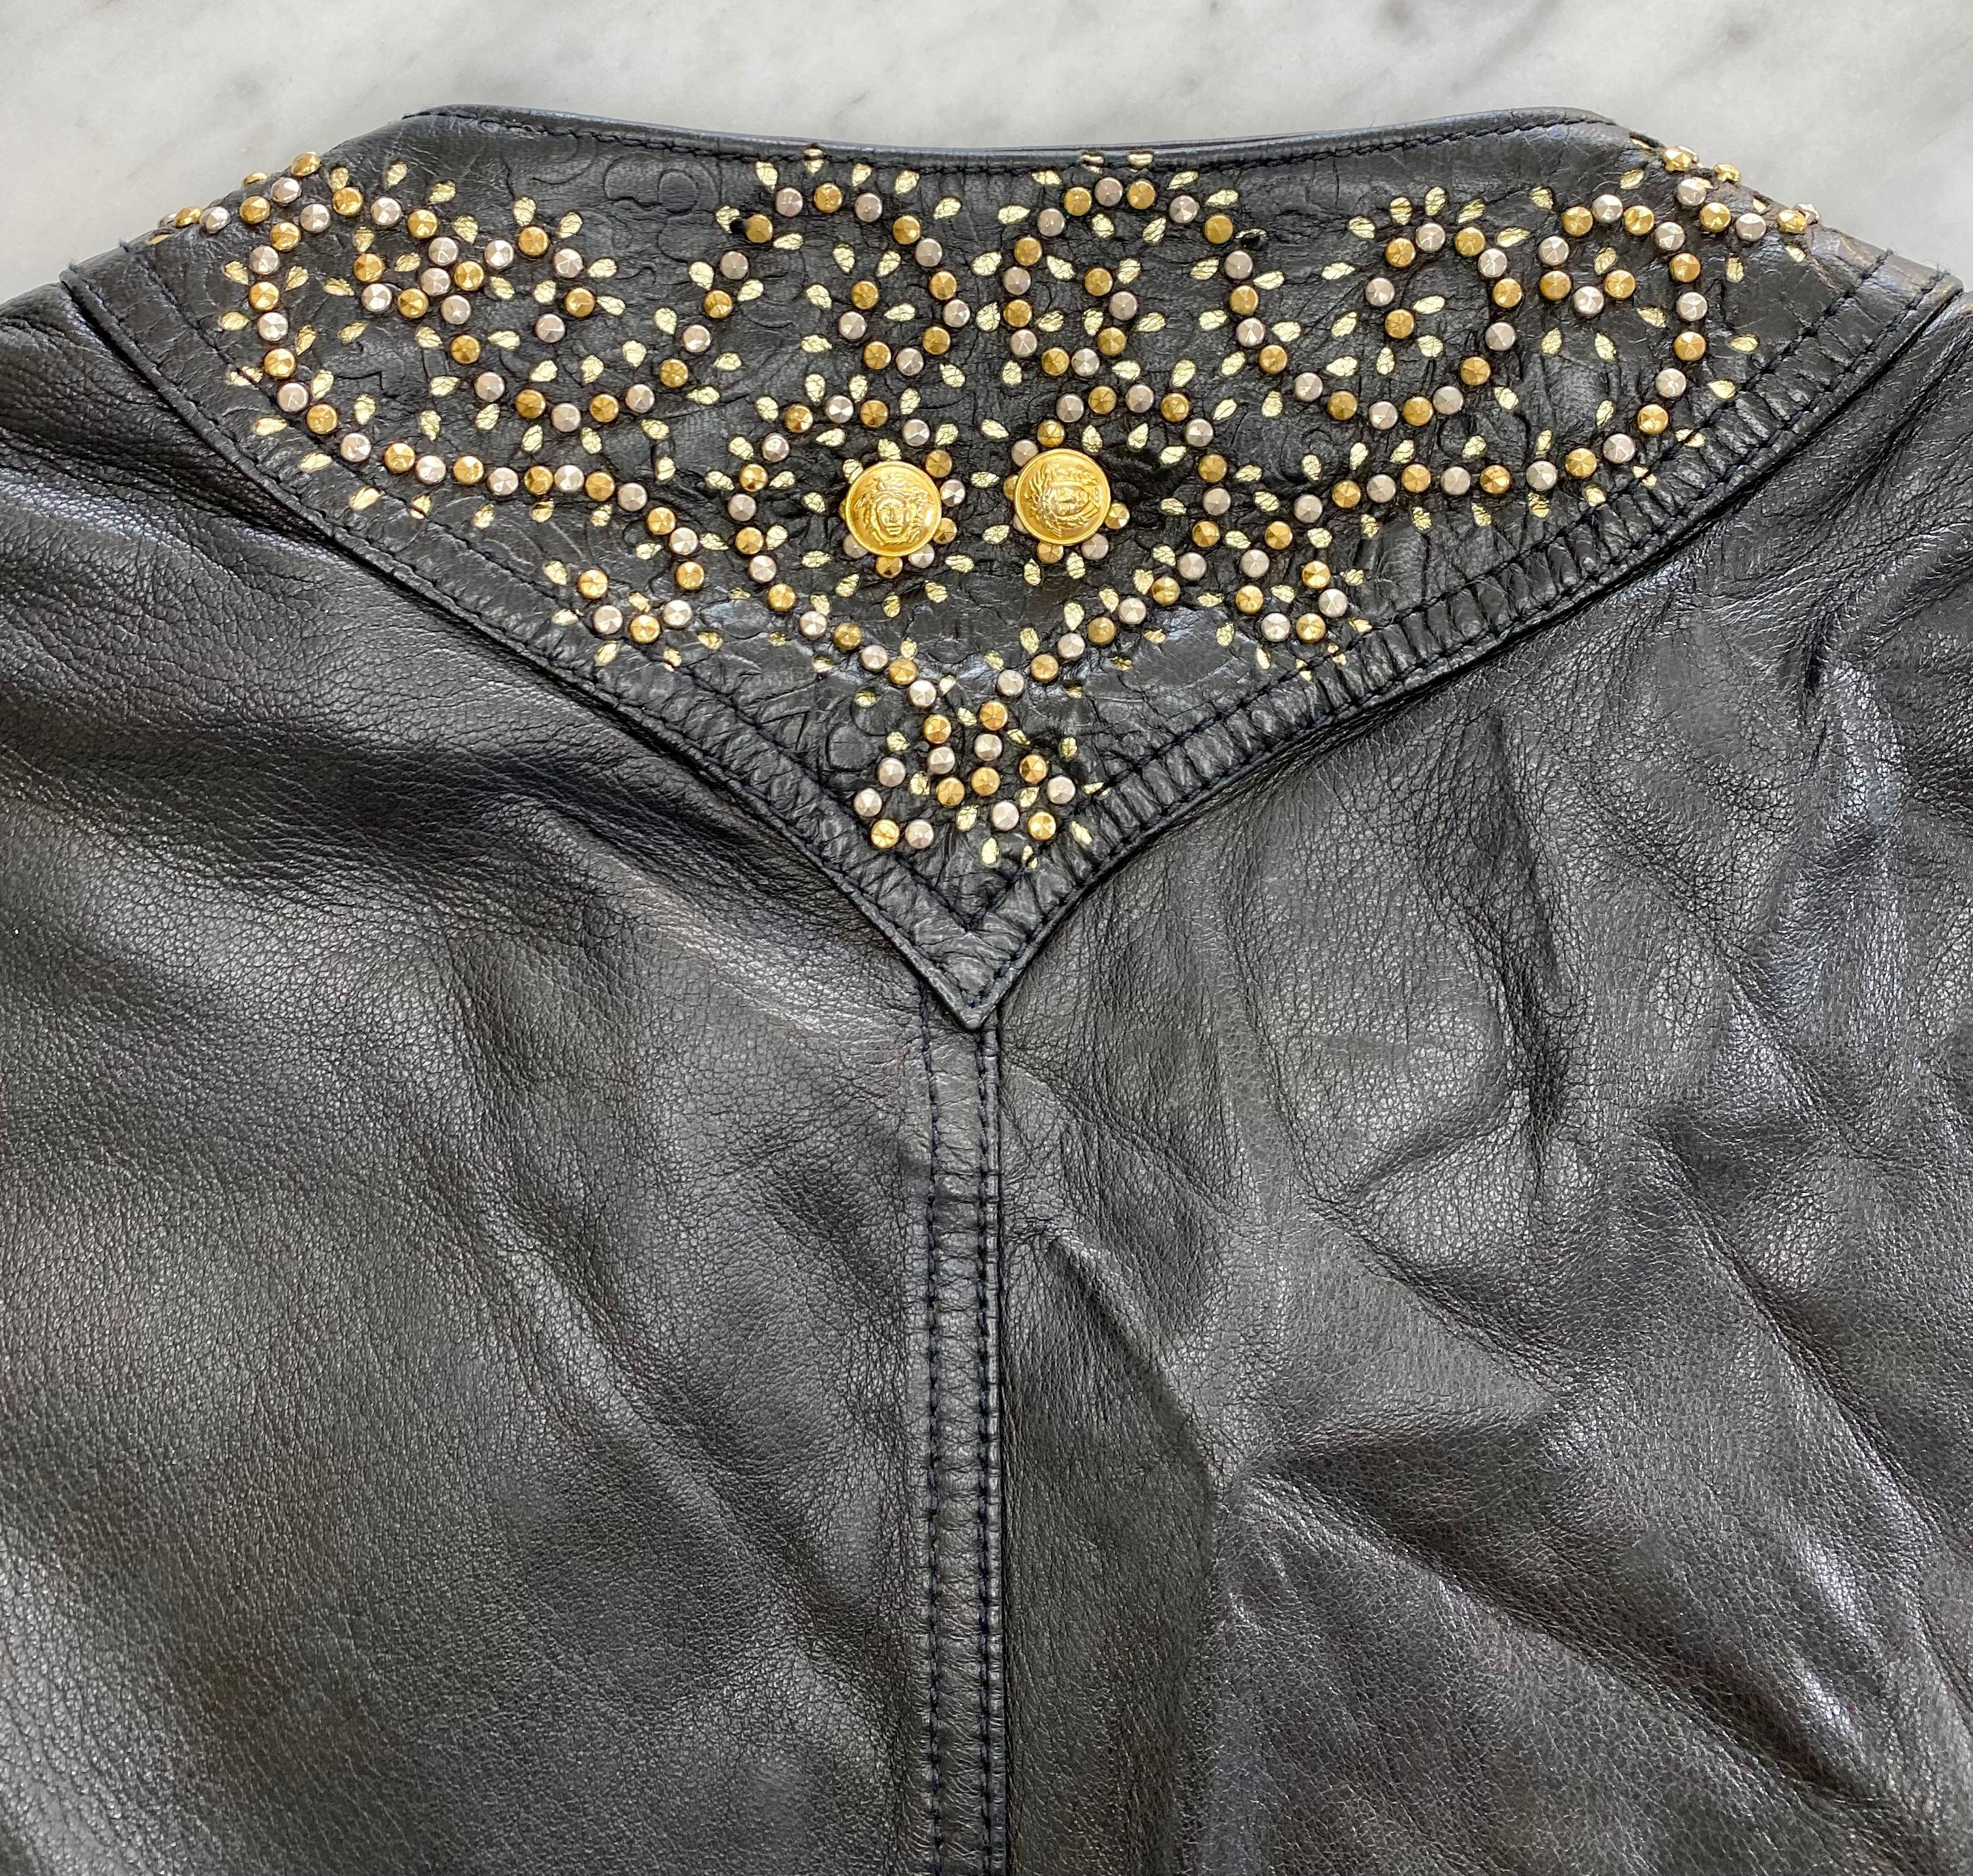 F/W 1992 Gianni Versace 'Miss S&M' Studded Leather Vest Medusa Accents For Sale 4